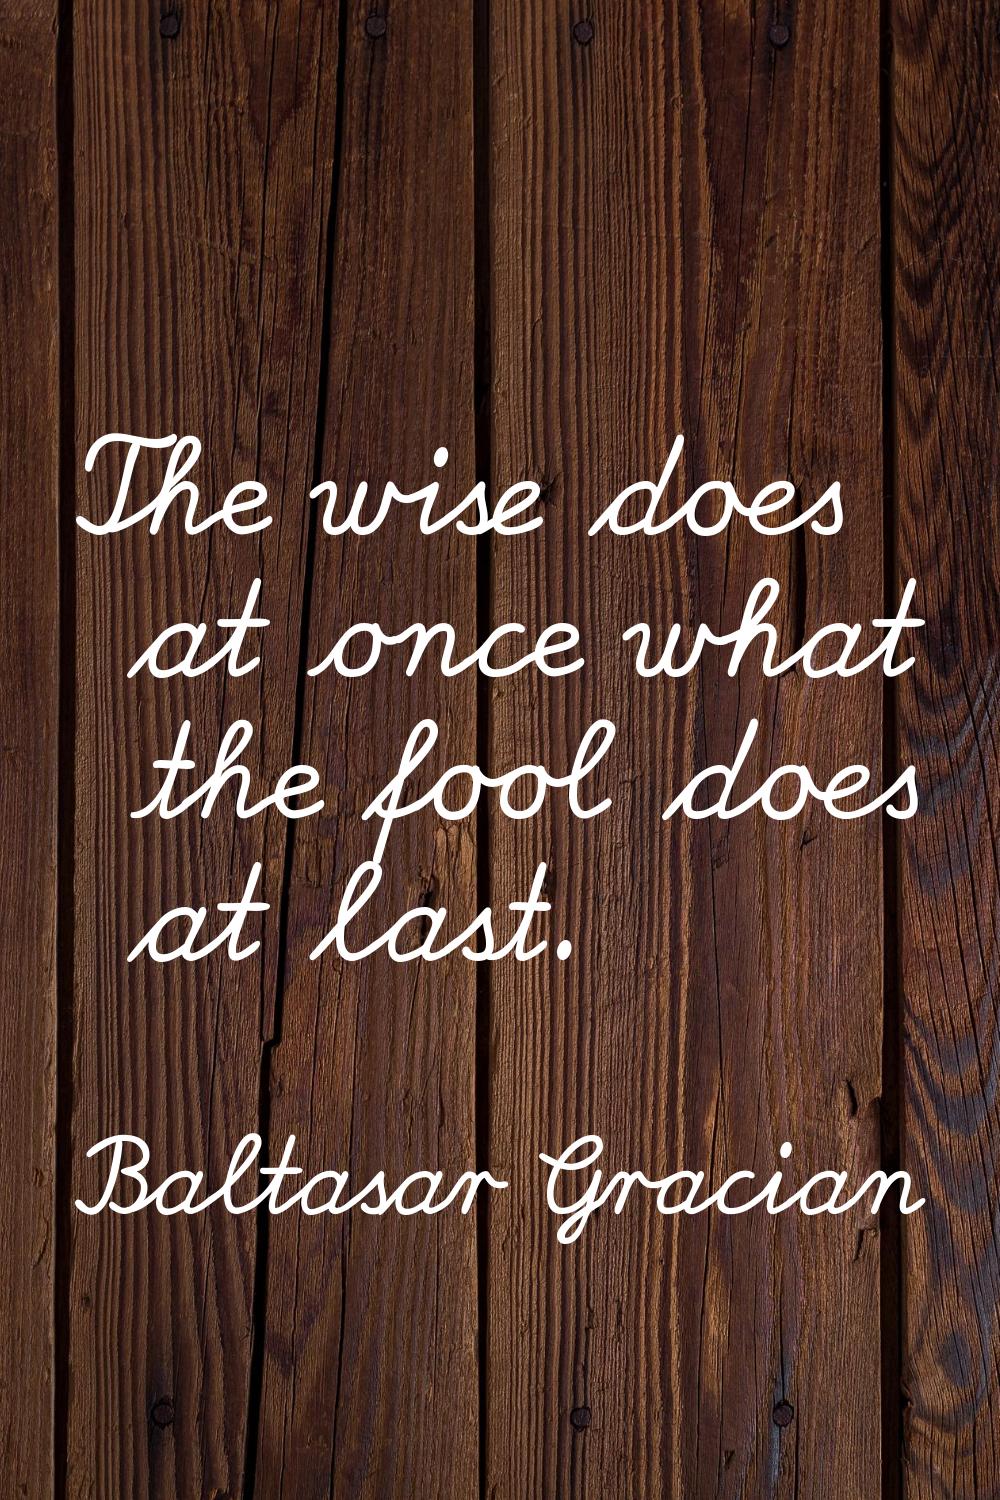 The wise does at once what the fool does at last.